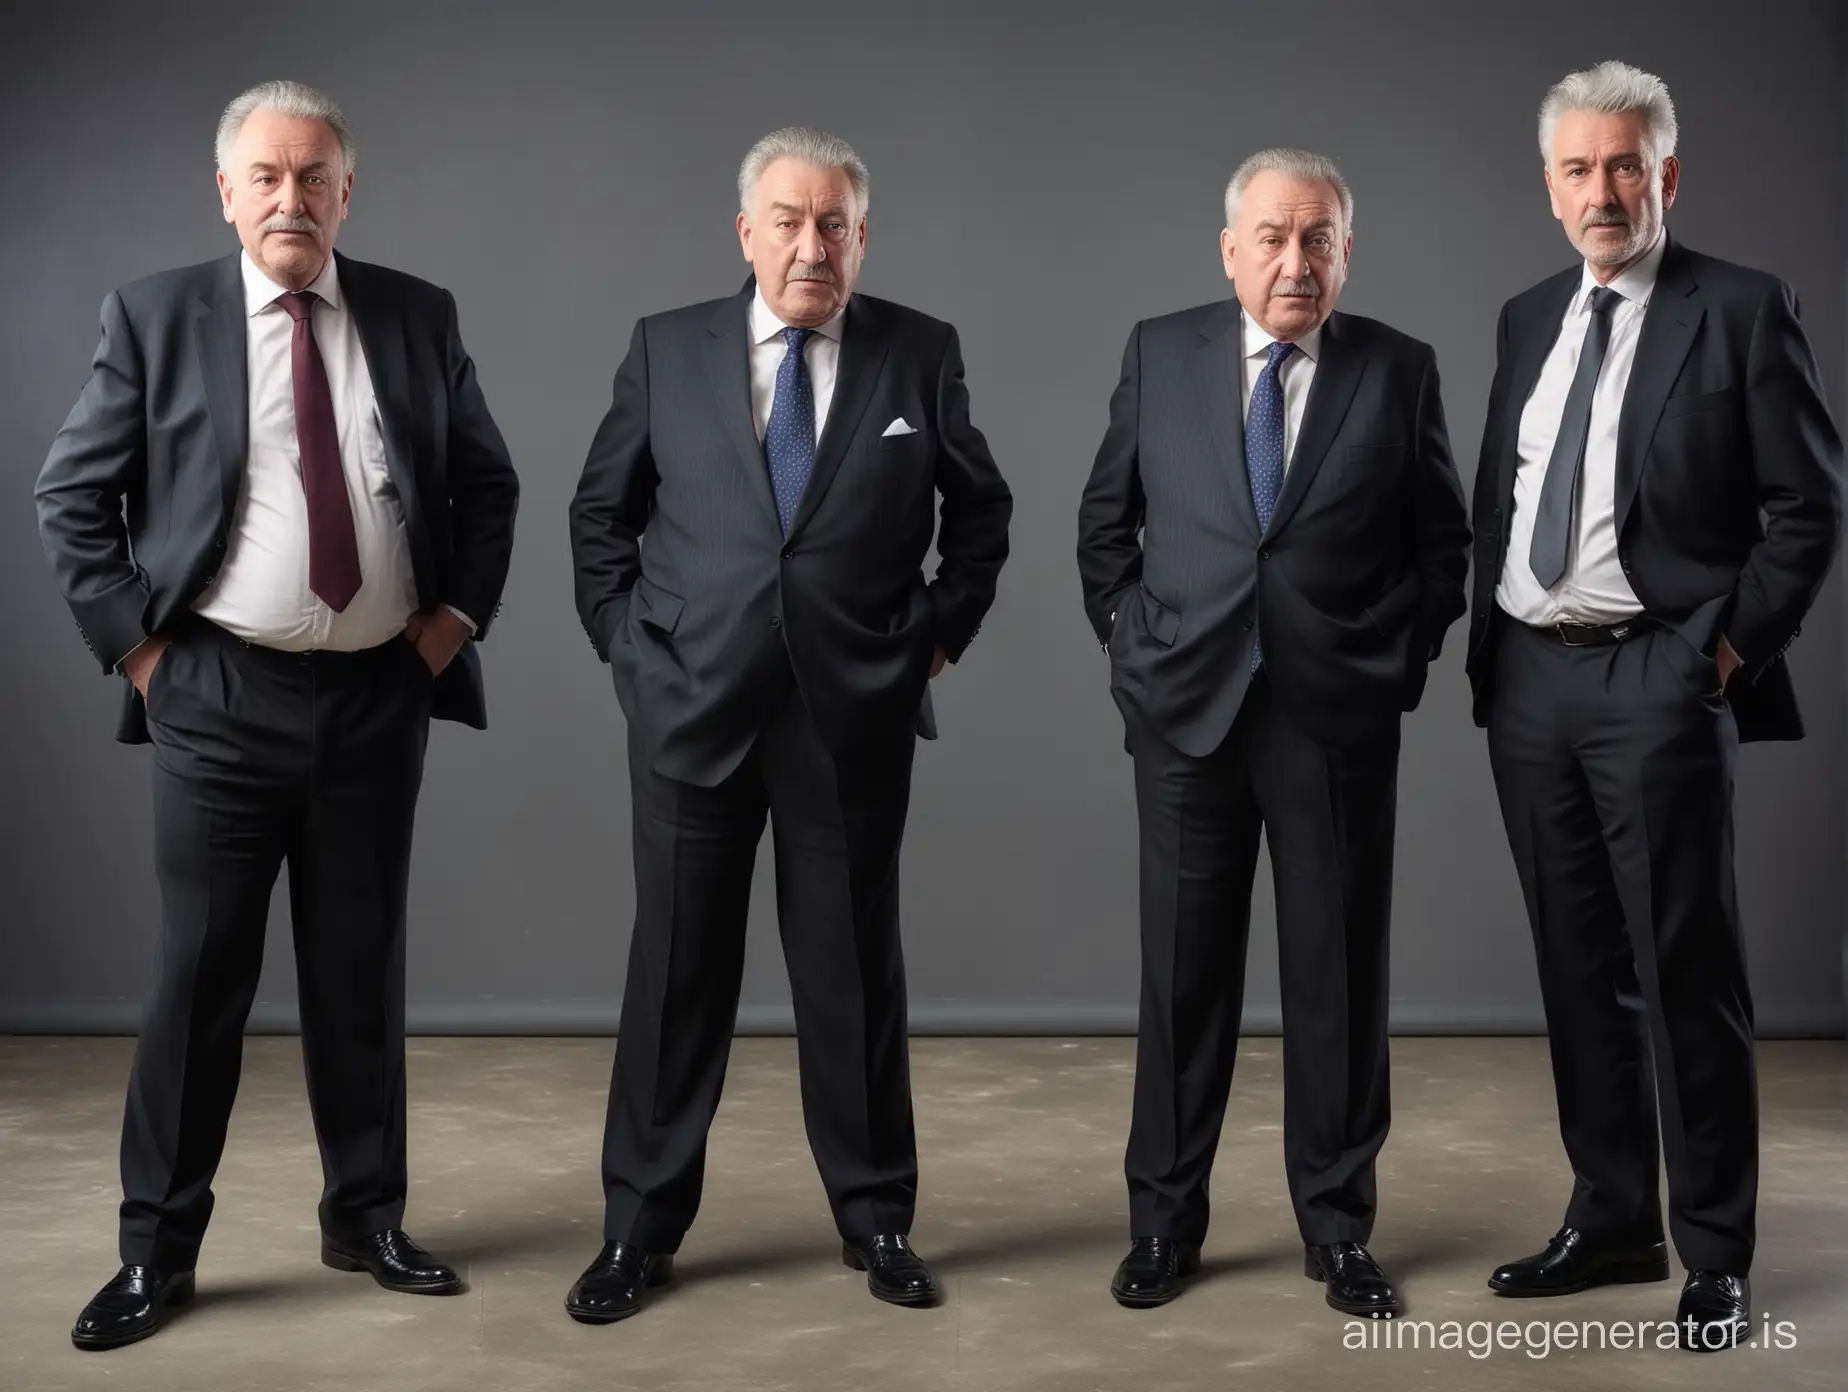 Three fat English gentlemen, all 80 years old businessman, shot height, both wearing suits, black loafers, grey hair,  embarrassing face, bending down, having urethral infection, painful face, full body shot, full body shot, office background, dramatic lighting